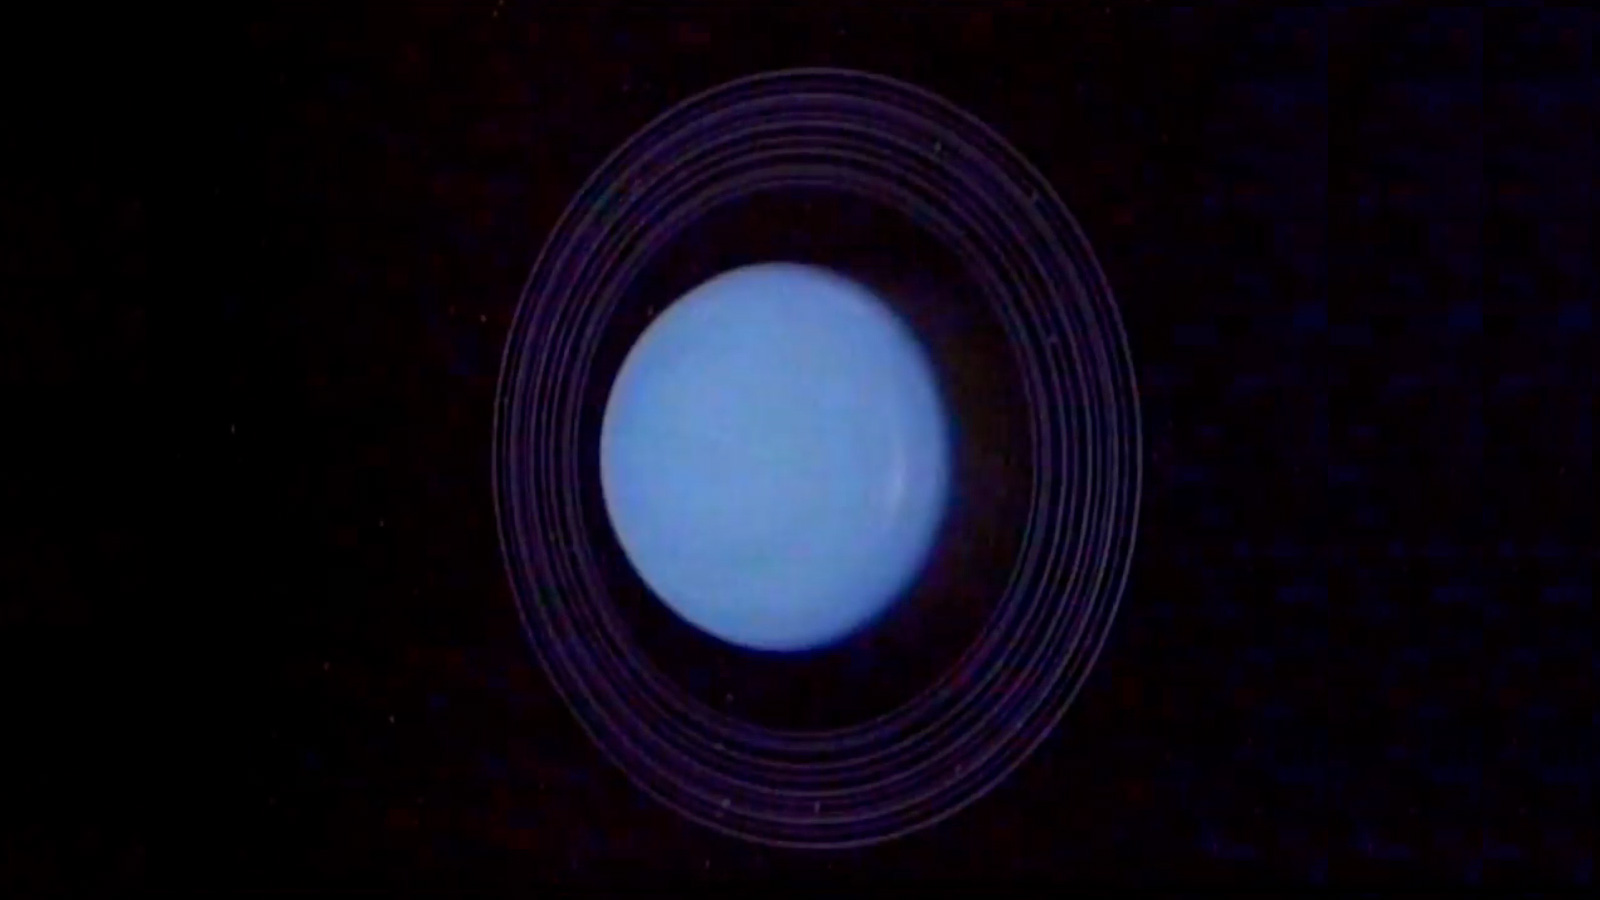 No spacecraft has visited Uranus since the Voyager 2 mission's 1986 flyby.